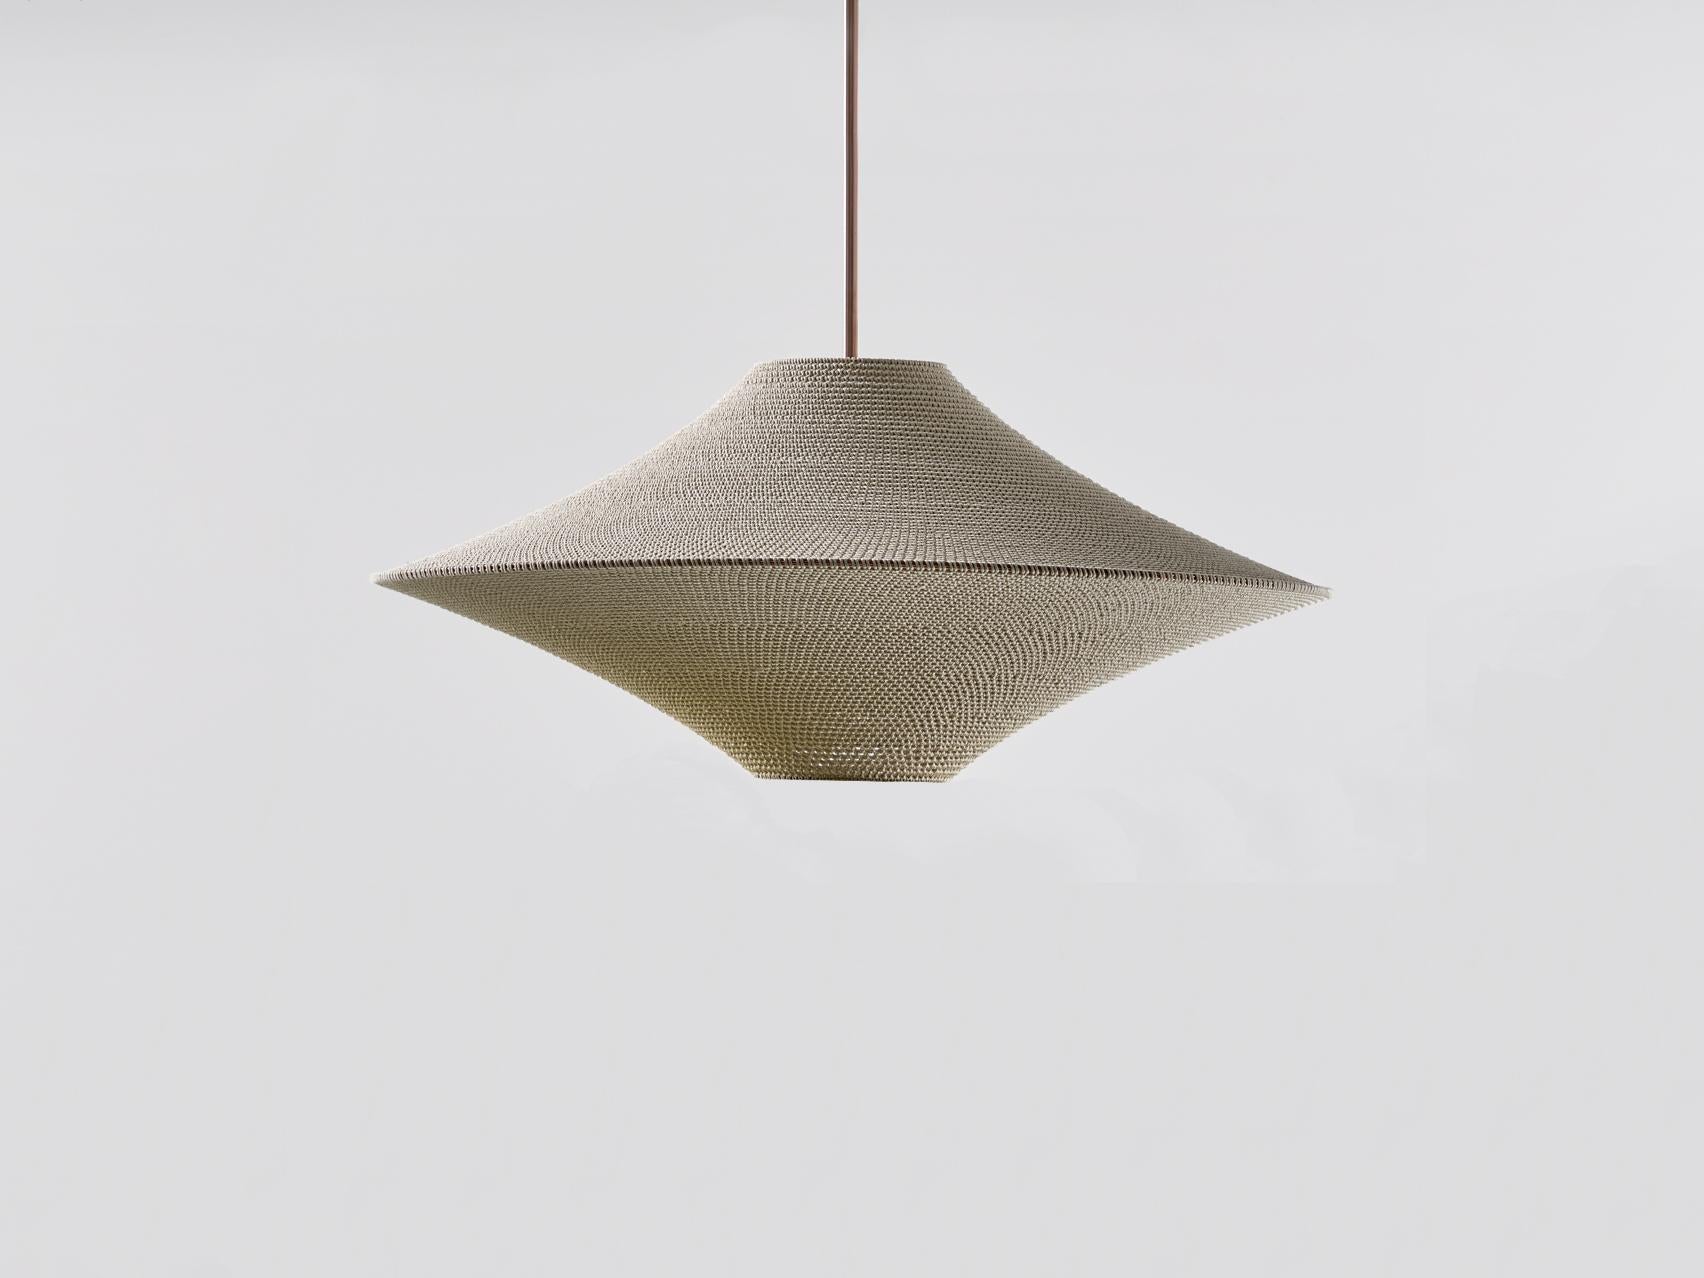 Each Naomi Paul pendant and lighting design is crafted entirely by hand in our London studio to order, by our highly skilled team of makers. Measure: Ø80cm/31.5in.

A diffused atmospheric light. SOLITAIRE makes a stunning focal point in an